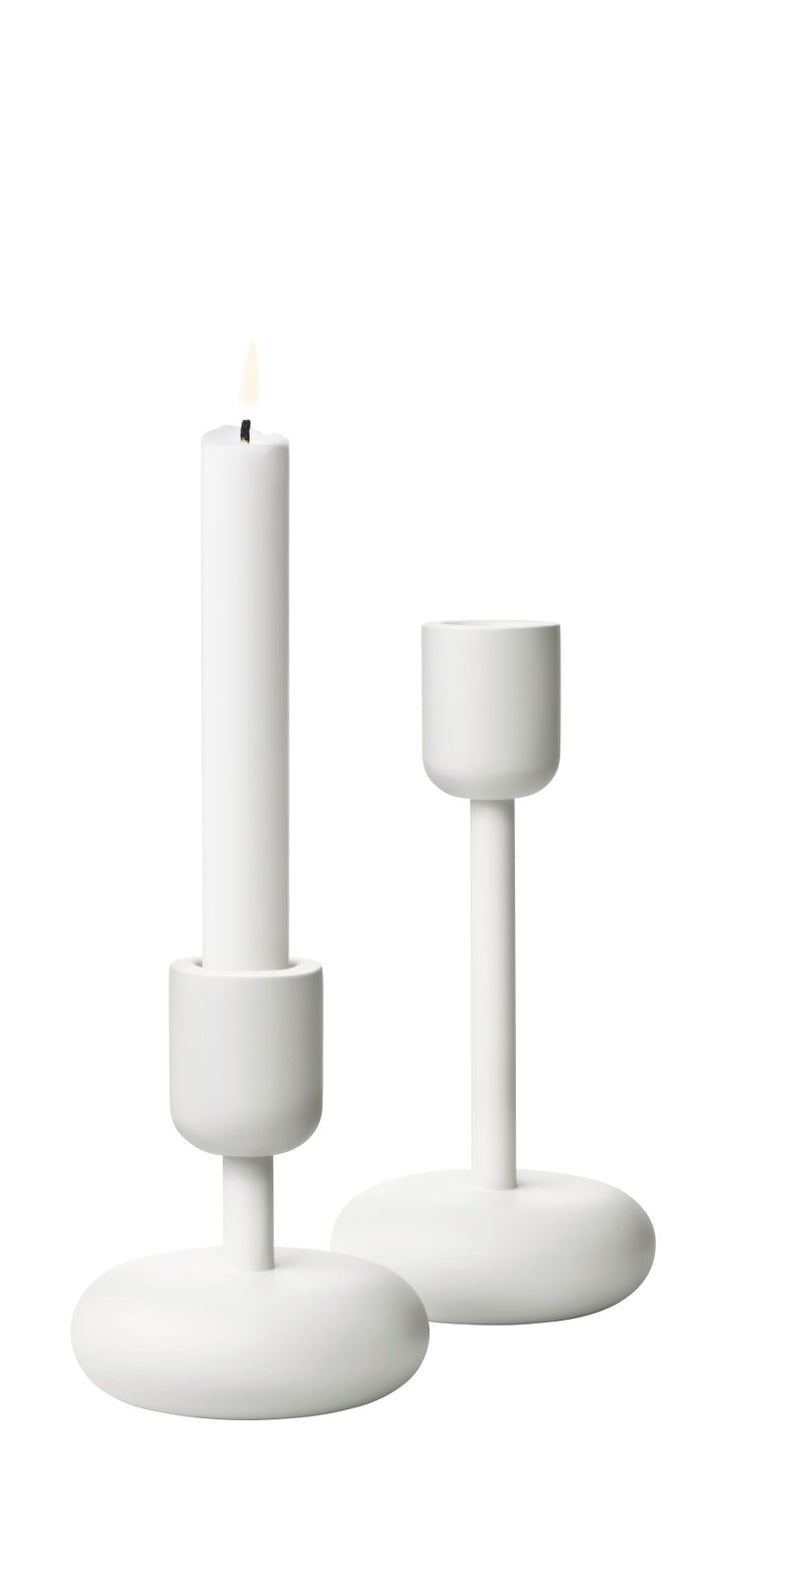 media image for Nappula Candleholder in Various Sizes & Colors design by Matti Klenell for Iittala 230